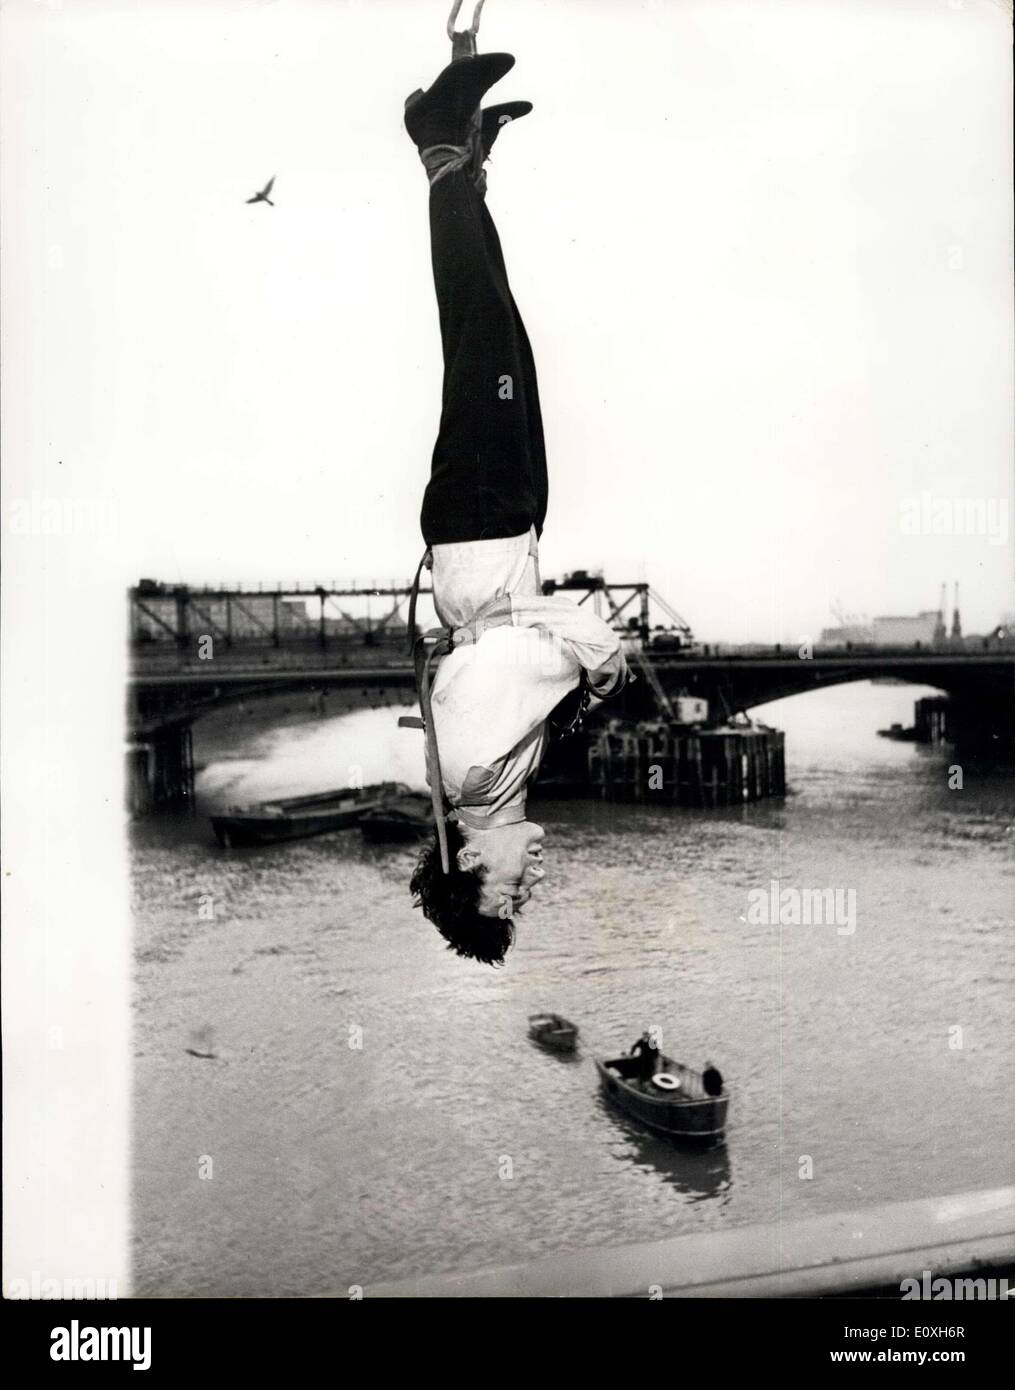 Dec. 19, 1966 - Escapologist accepts challenge to escape from a straight jacket while suspended upside down over Thames: Timothy Dill-Russell, escapology adviser to the musical ''Man of Magic'' at the Piccadilly Theatre today attempted a Houdini-style escape from a straight jacket whilst suspended by his heels upside down from a crane over the River Thames at Chelsea Bridge. He was challenged to do this by Stuart Damon, who plays Houdini in the show. Photo shows Timothy Dill-Russell seen hanging by his heels over the Thames, during his escape from straightjacket and handcuffs yesterday. Stock Photo